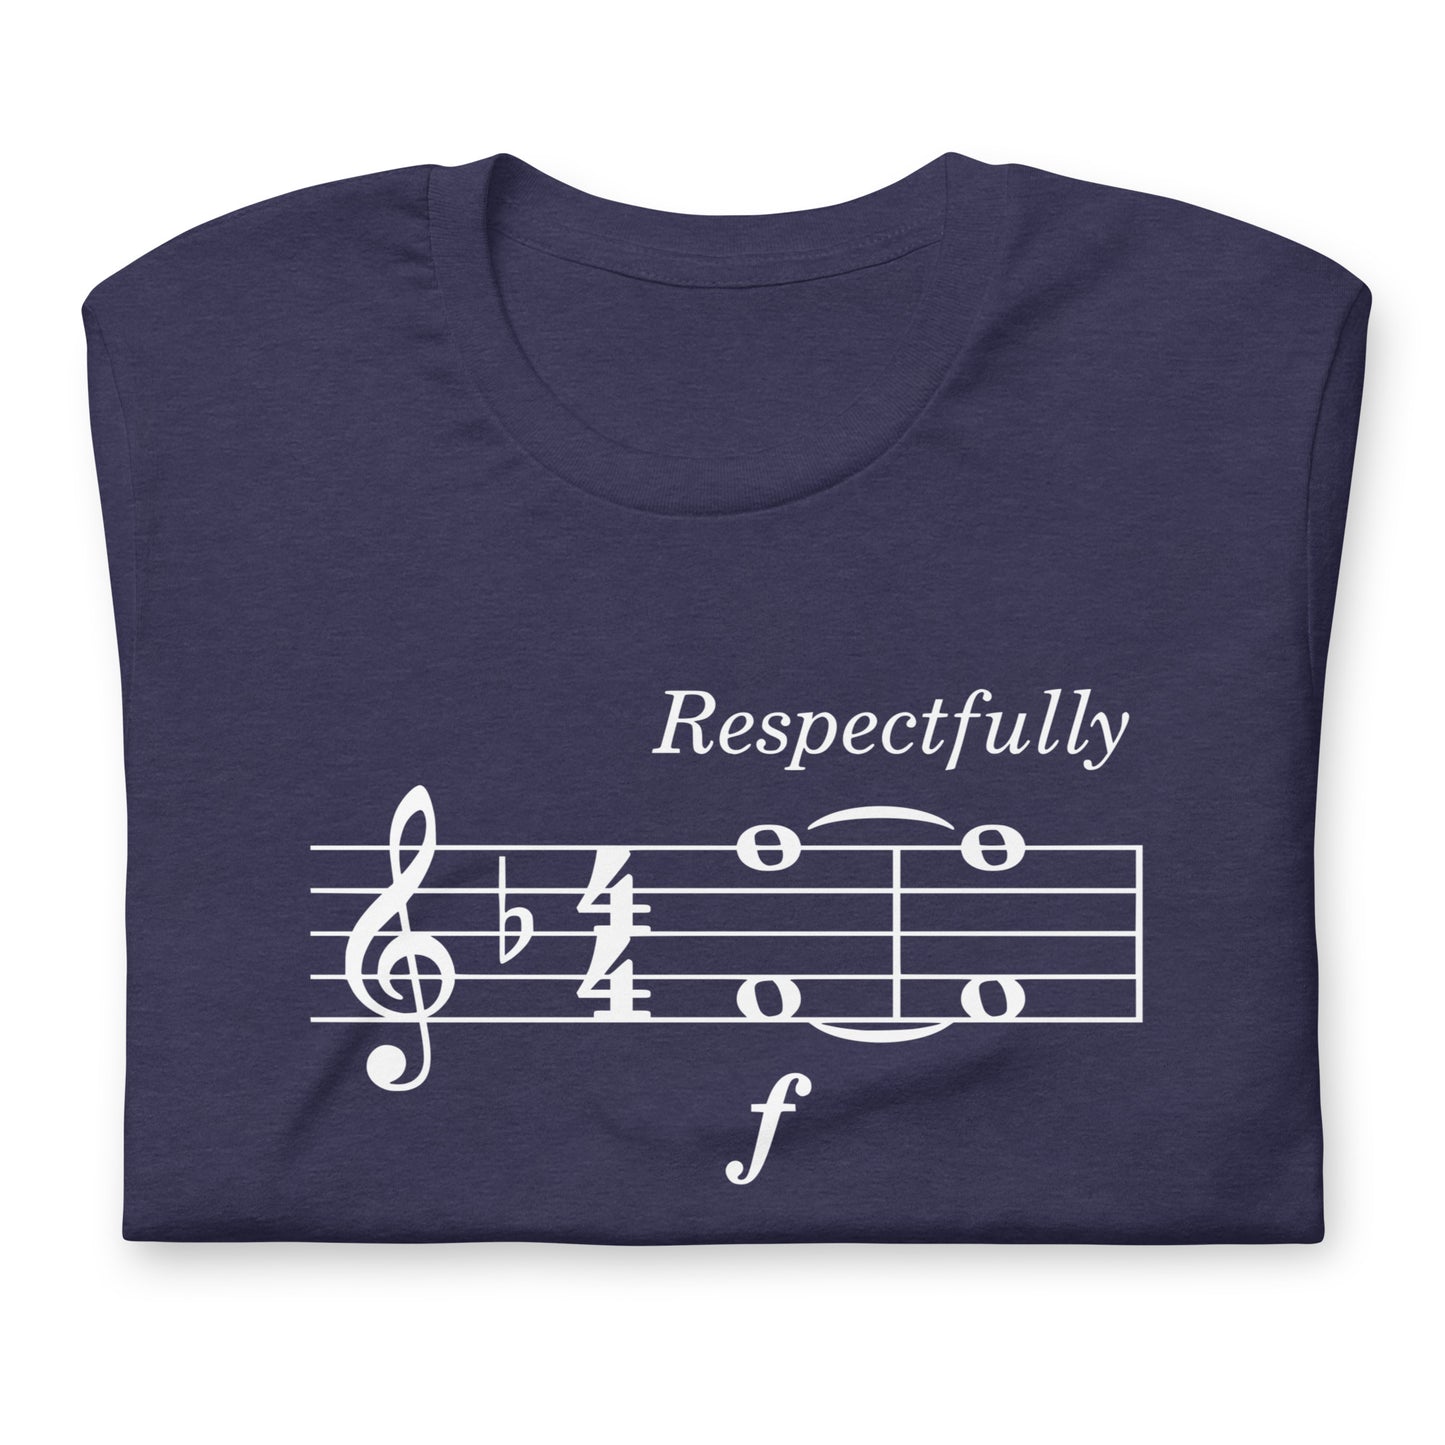 Funny Music Theory Video Game Meme T Shirt: Play F to Pay Respect - Navy Blue